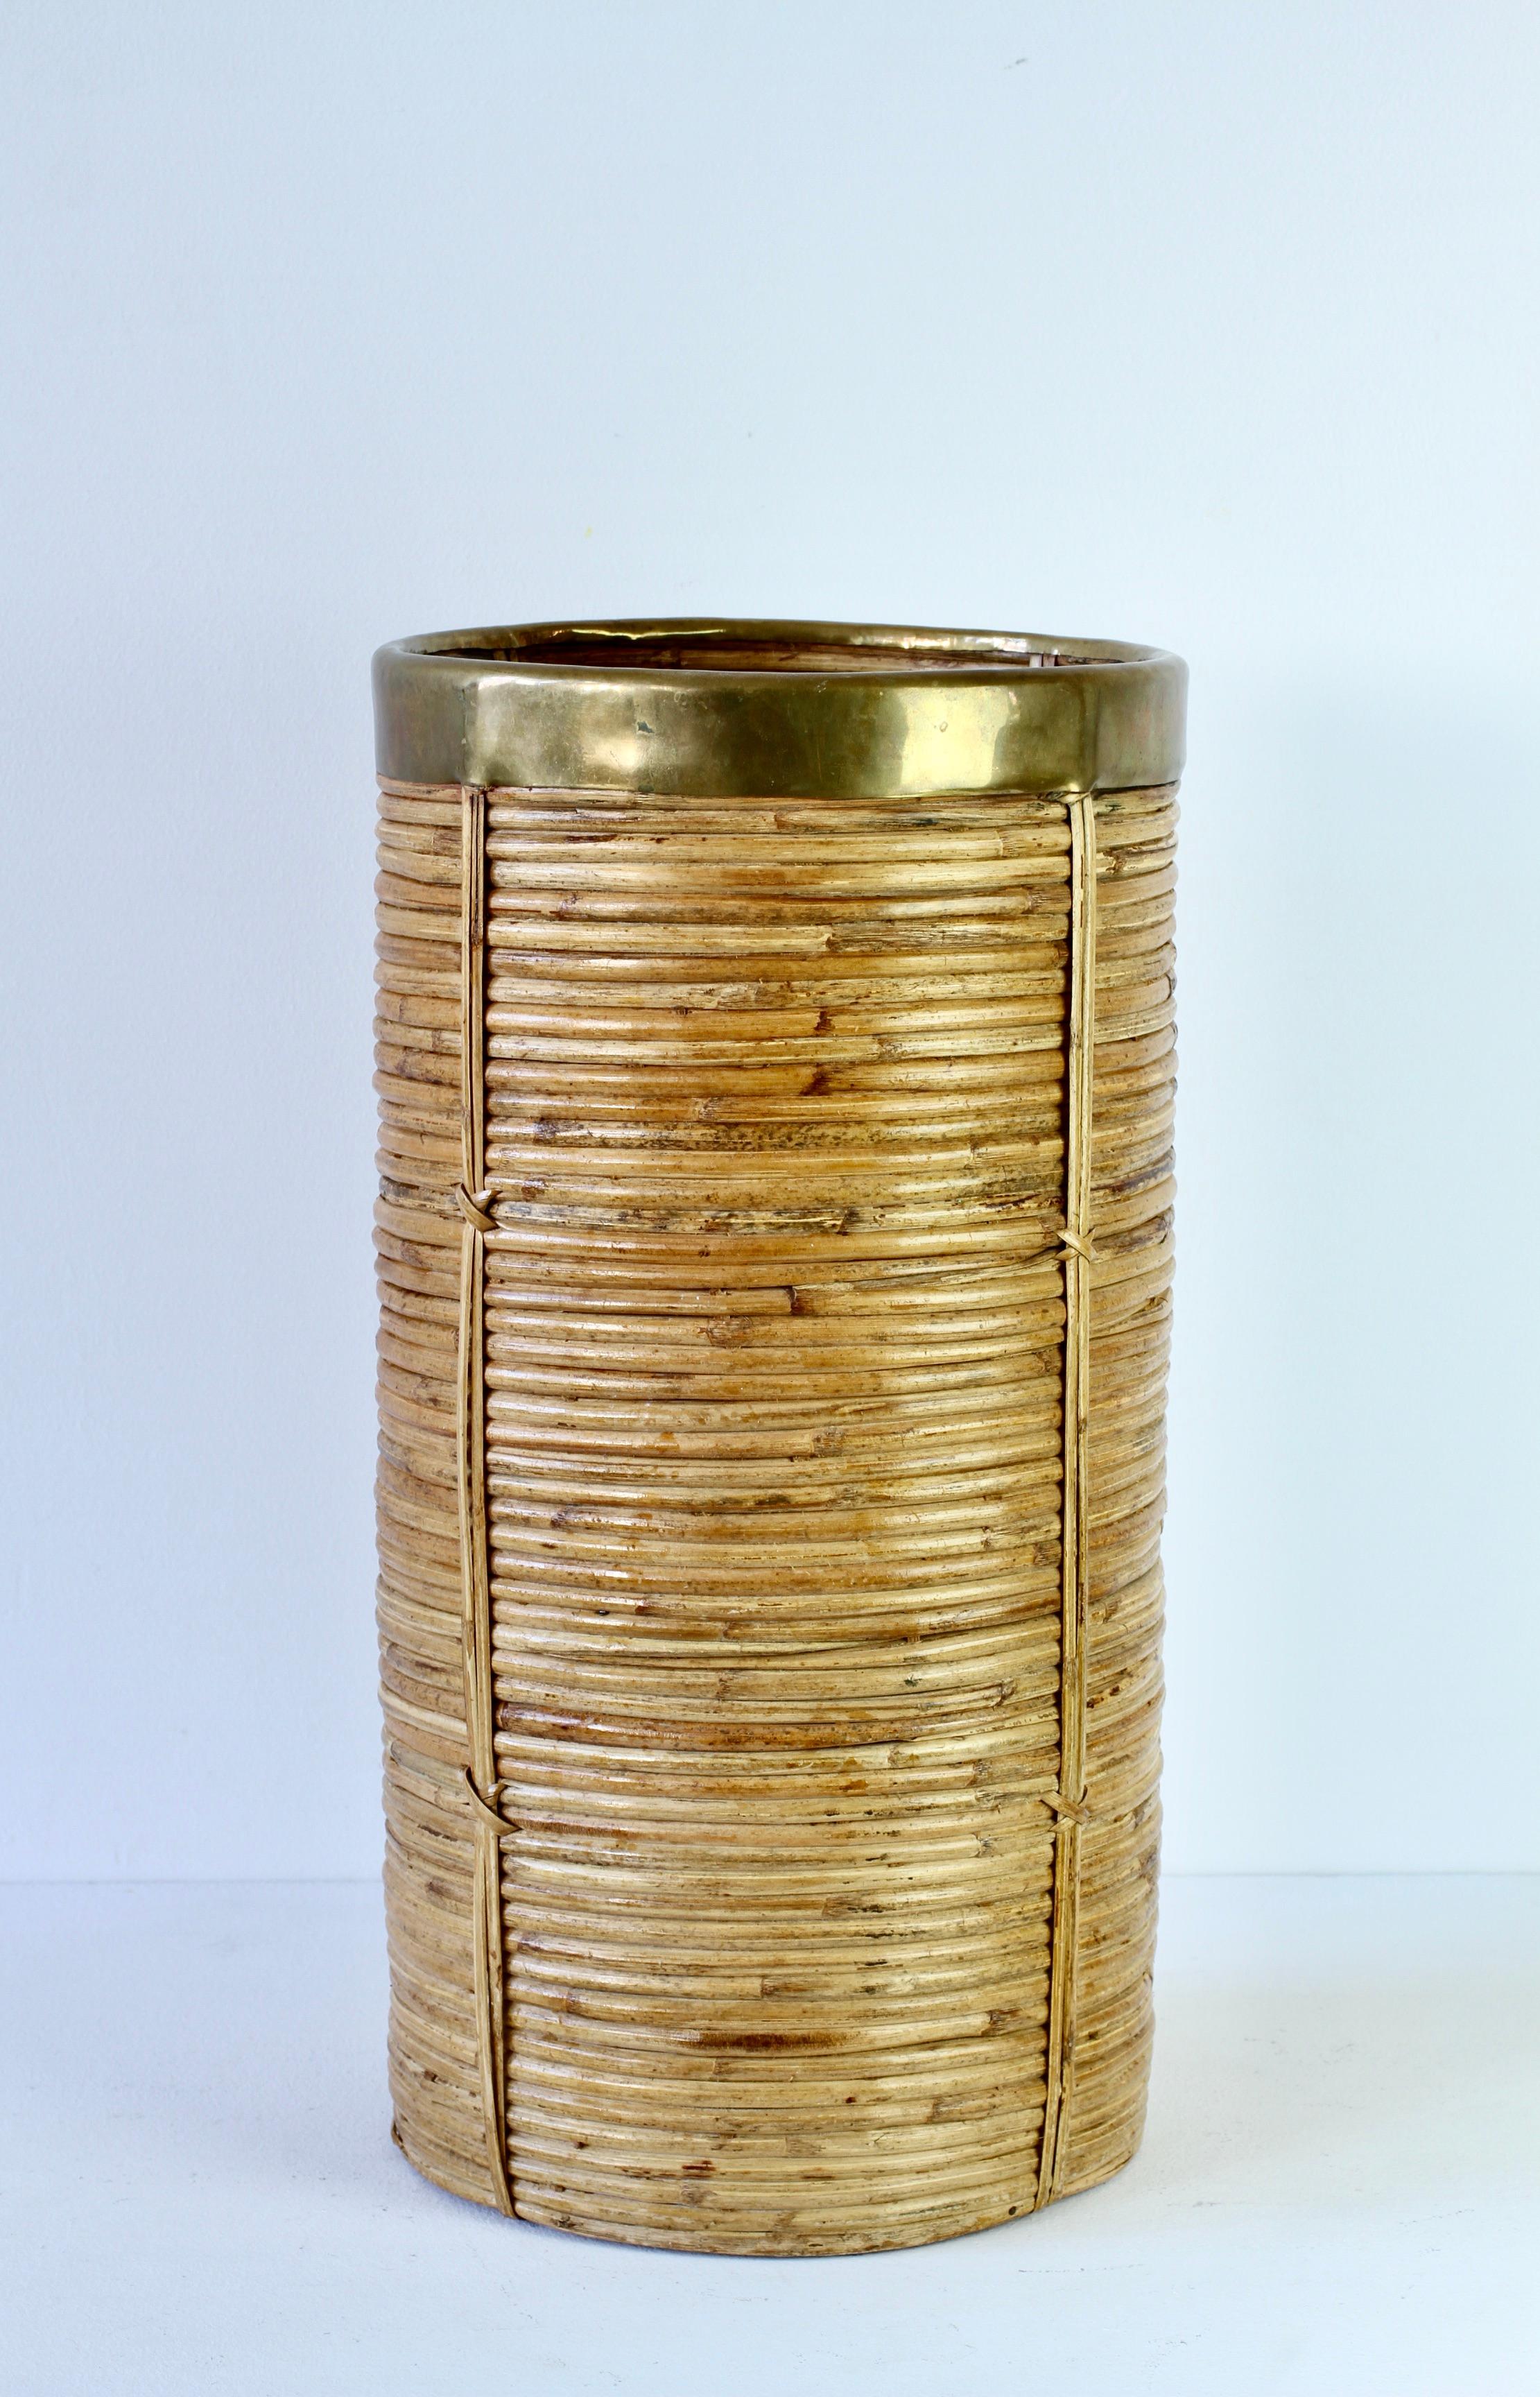 Tall and large midcentury Hollywood Regency umbrella stand / holder made in Italy, circa 1970s. Made of bamboo and rattan with a patinated brass metal rim, which finishes the piece perfectly. A must have for any Hollywood Regency enthusiast and